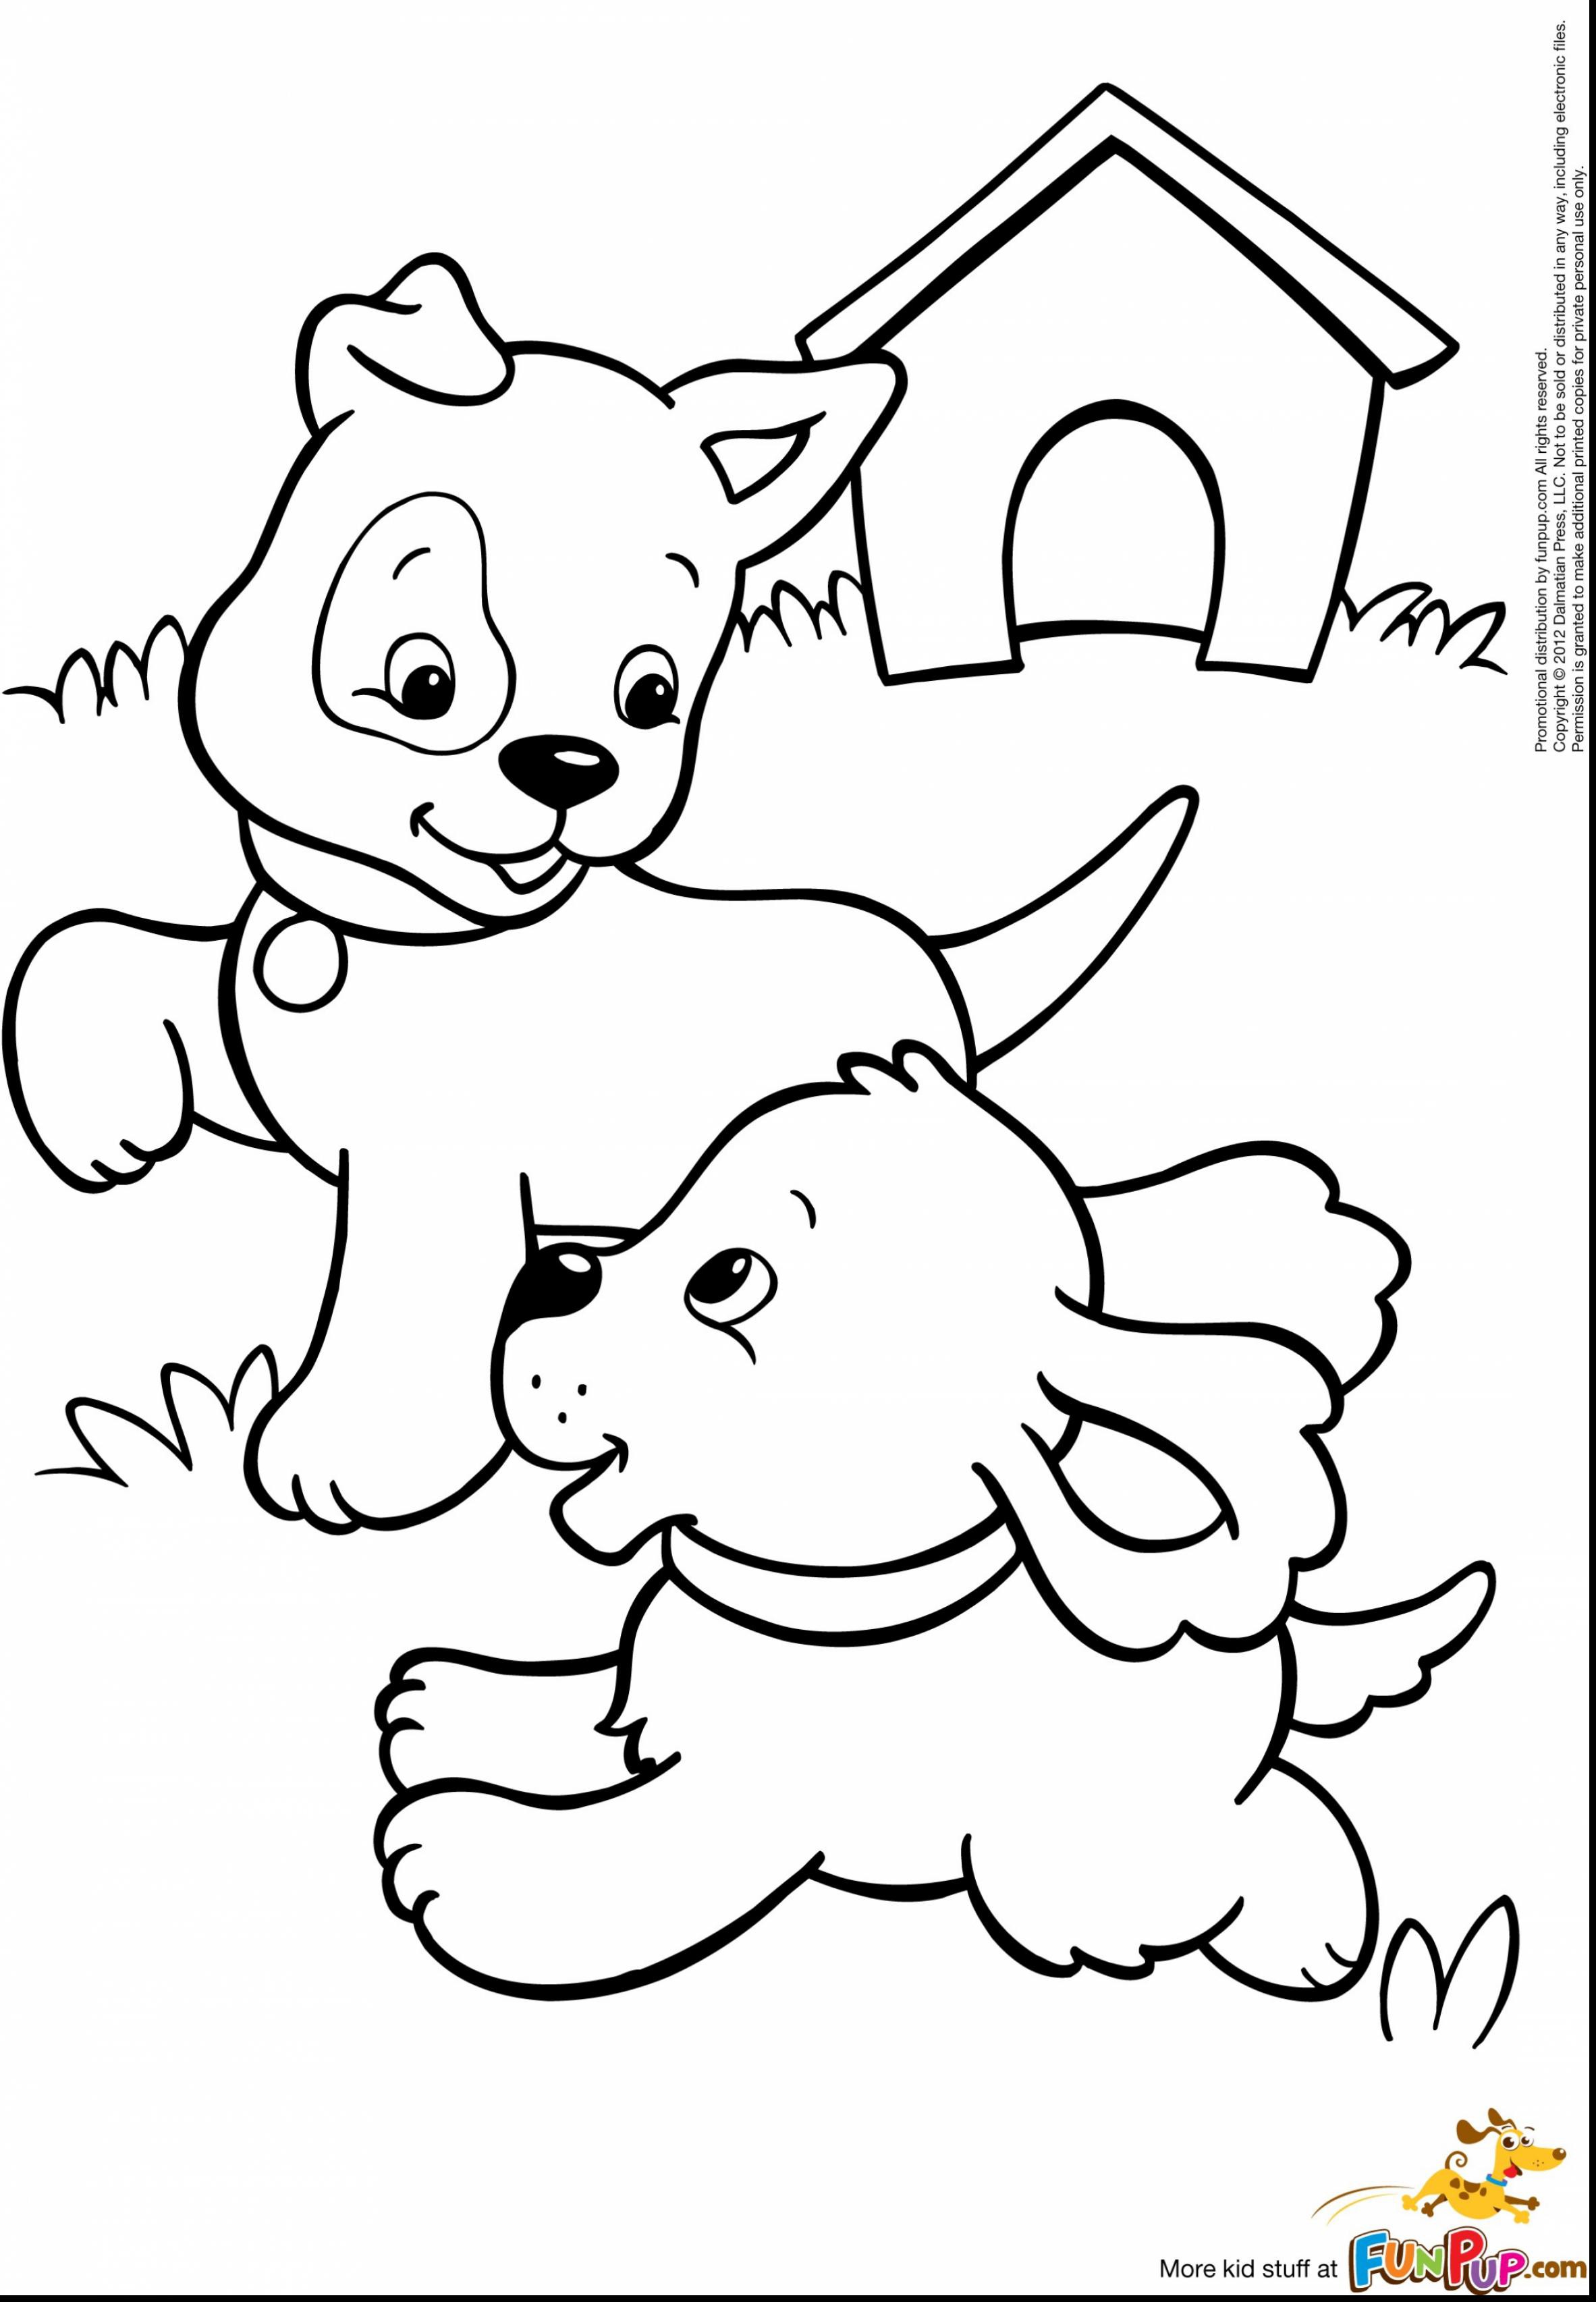 Fancy Coloring Pages Puppies 77 Coloring Books with Coloring Pages Puppies